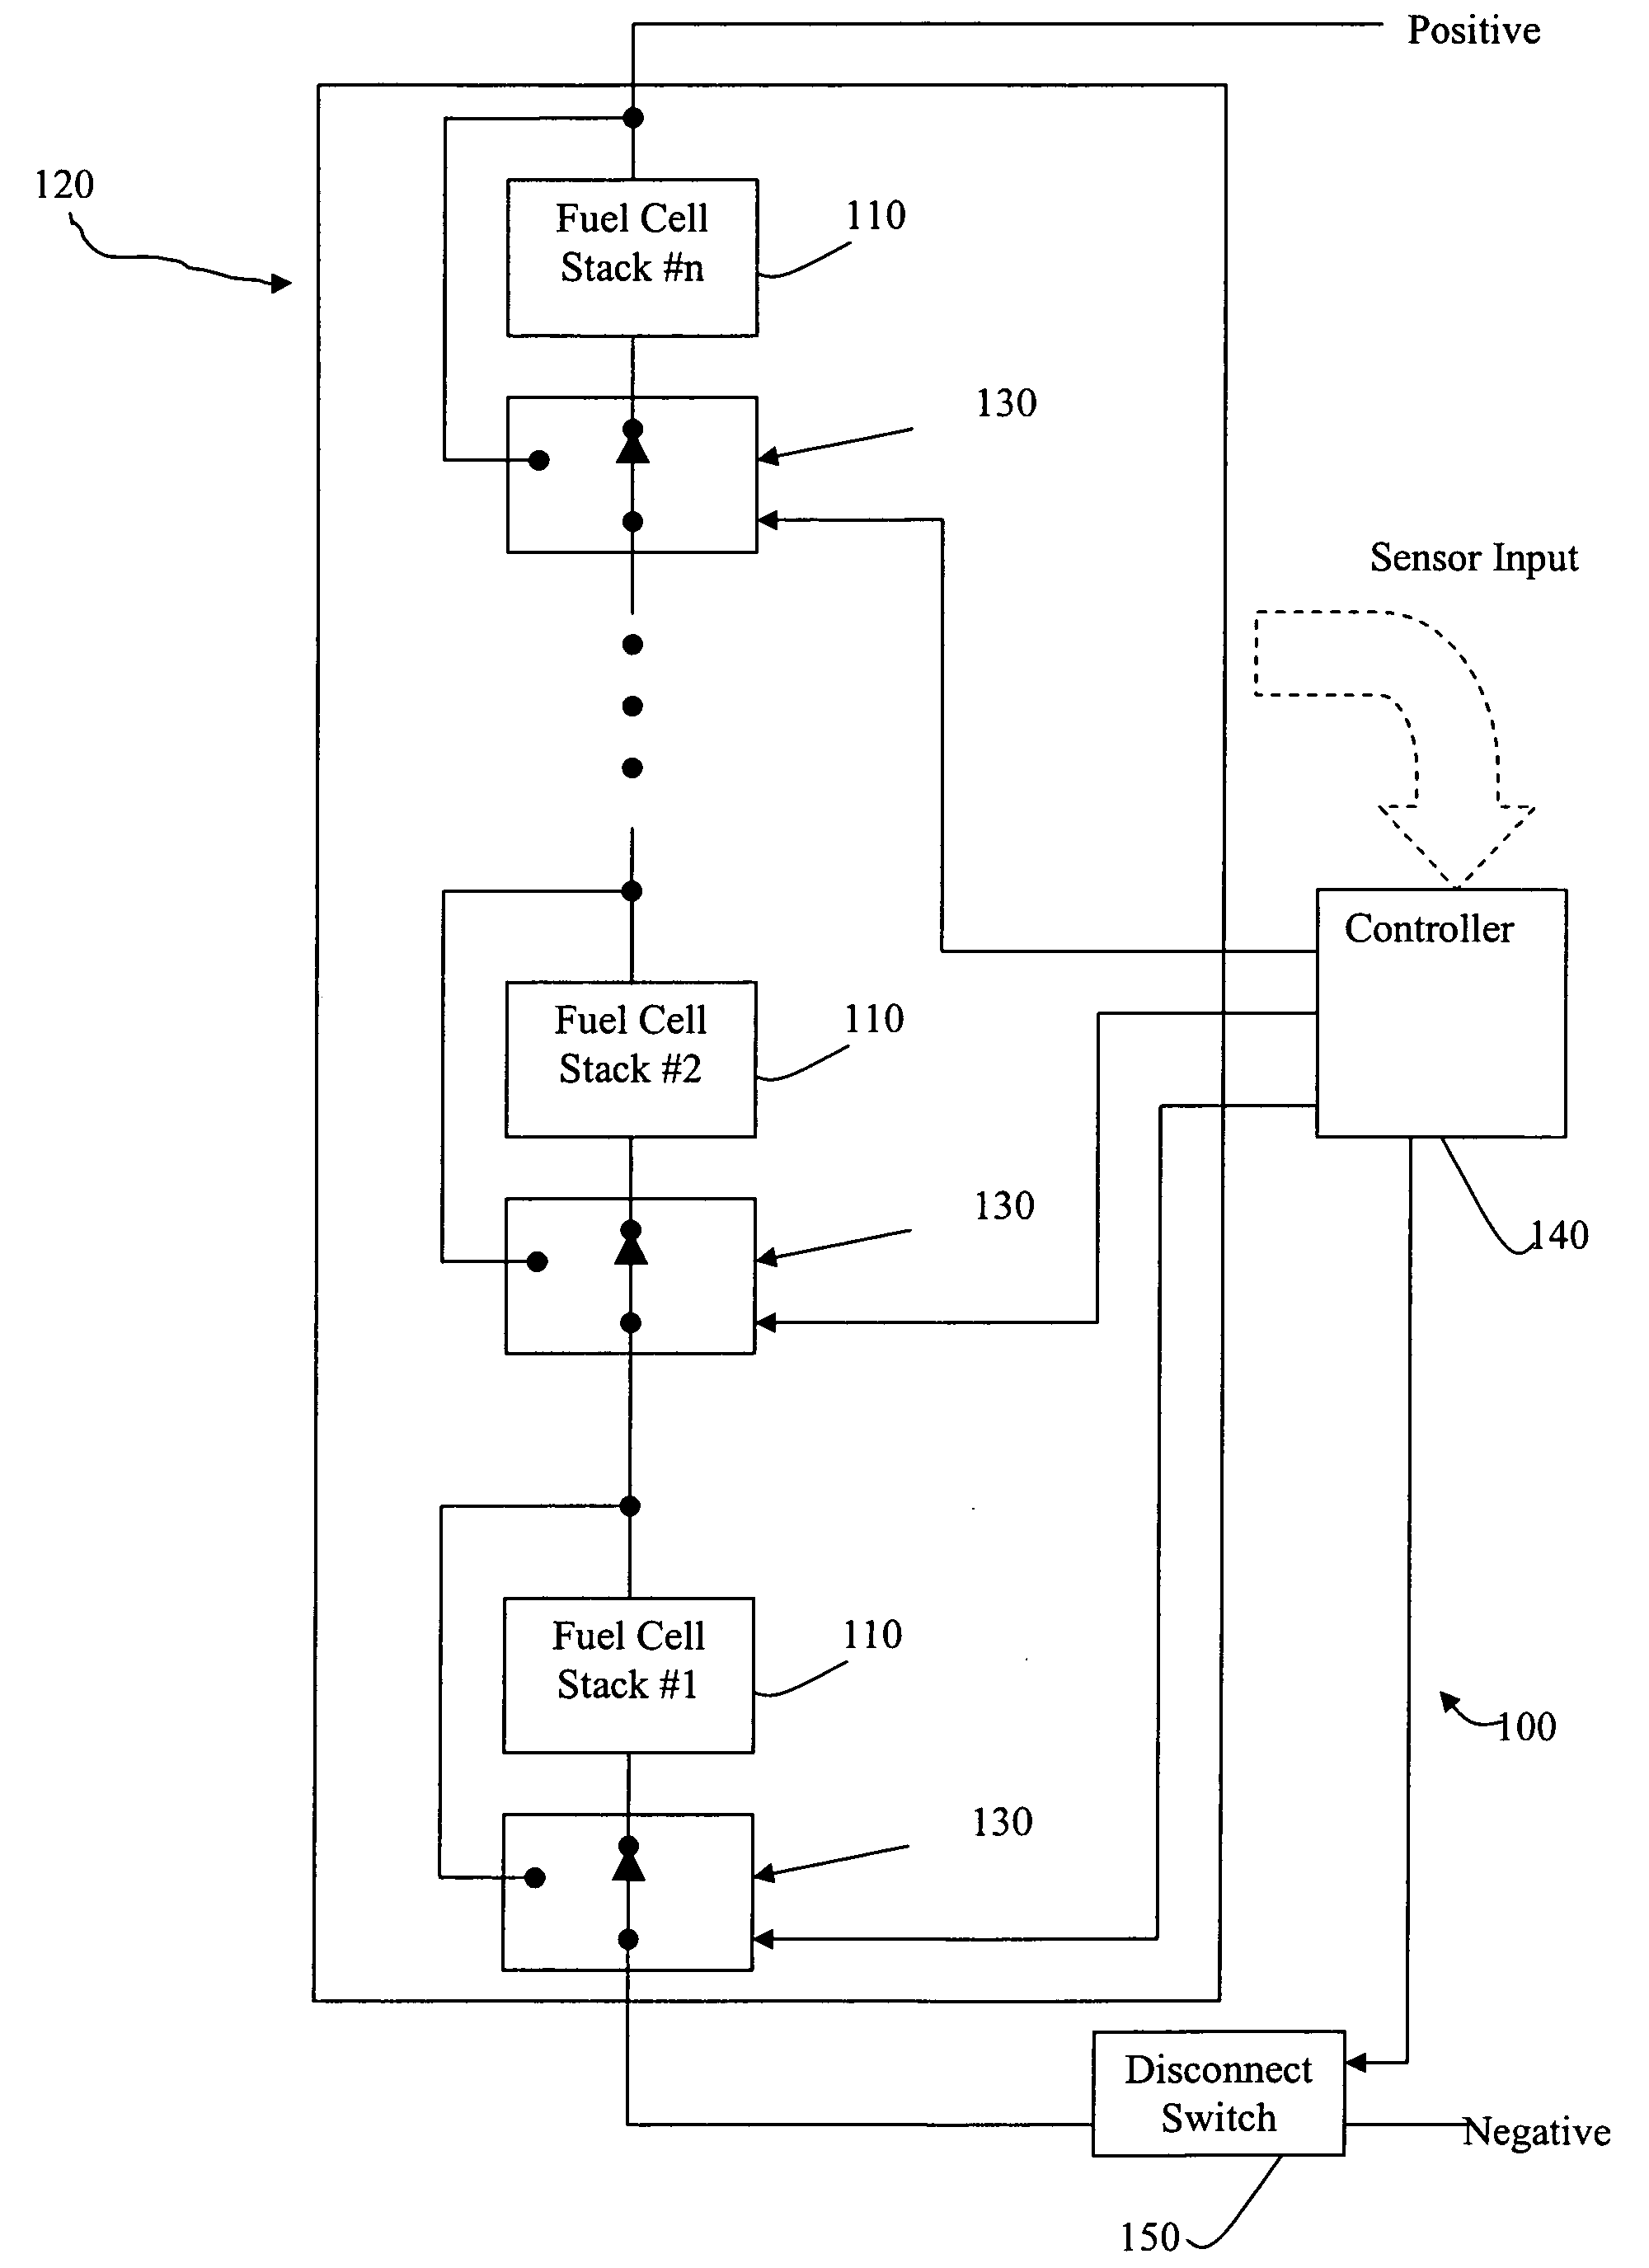 System and method for bypassing failed stacks in a multiple stack fuel cell